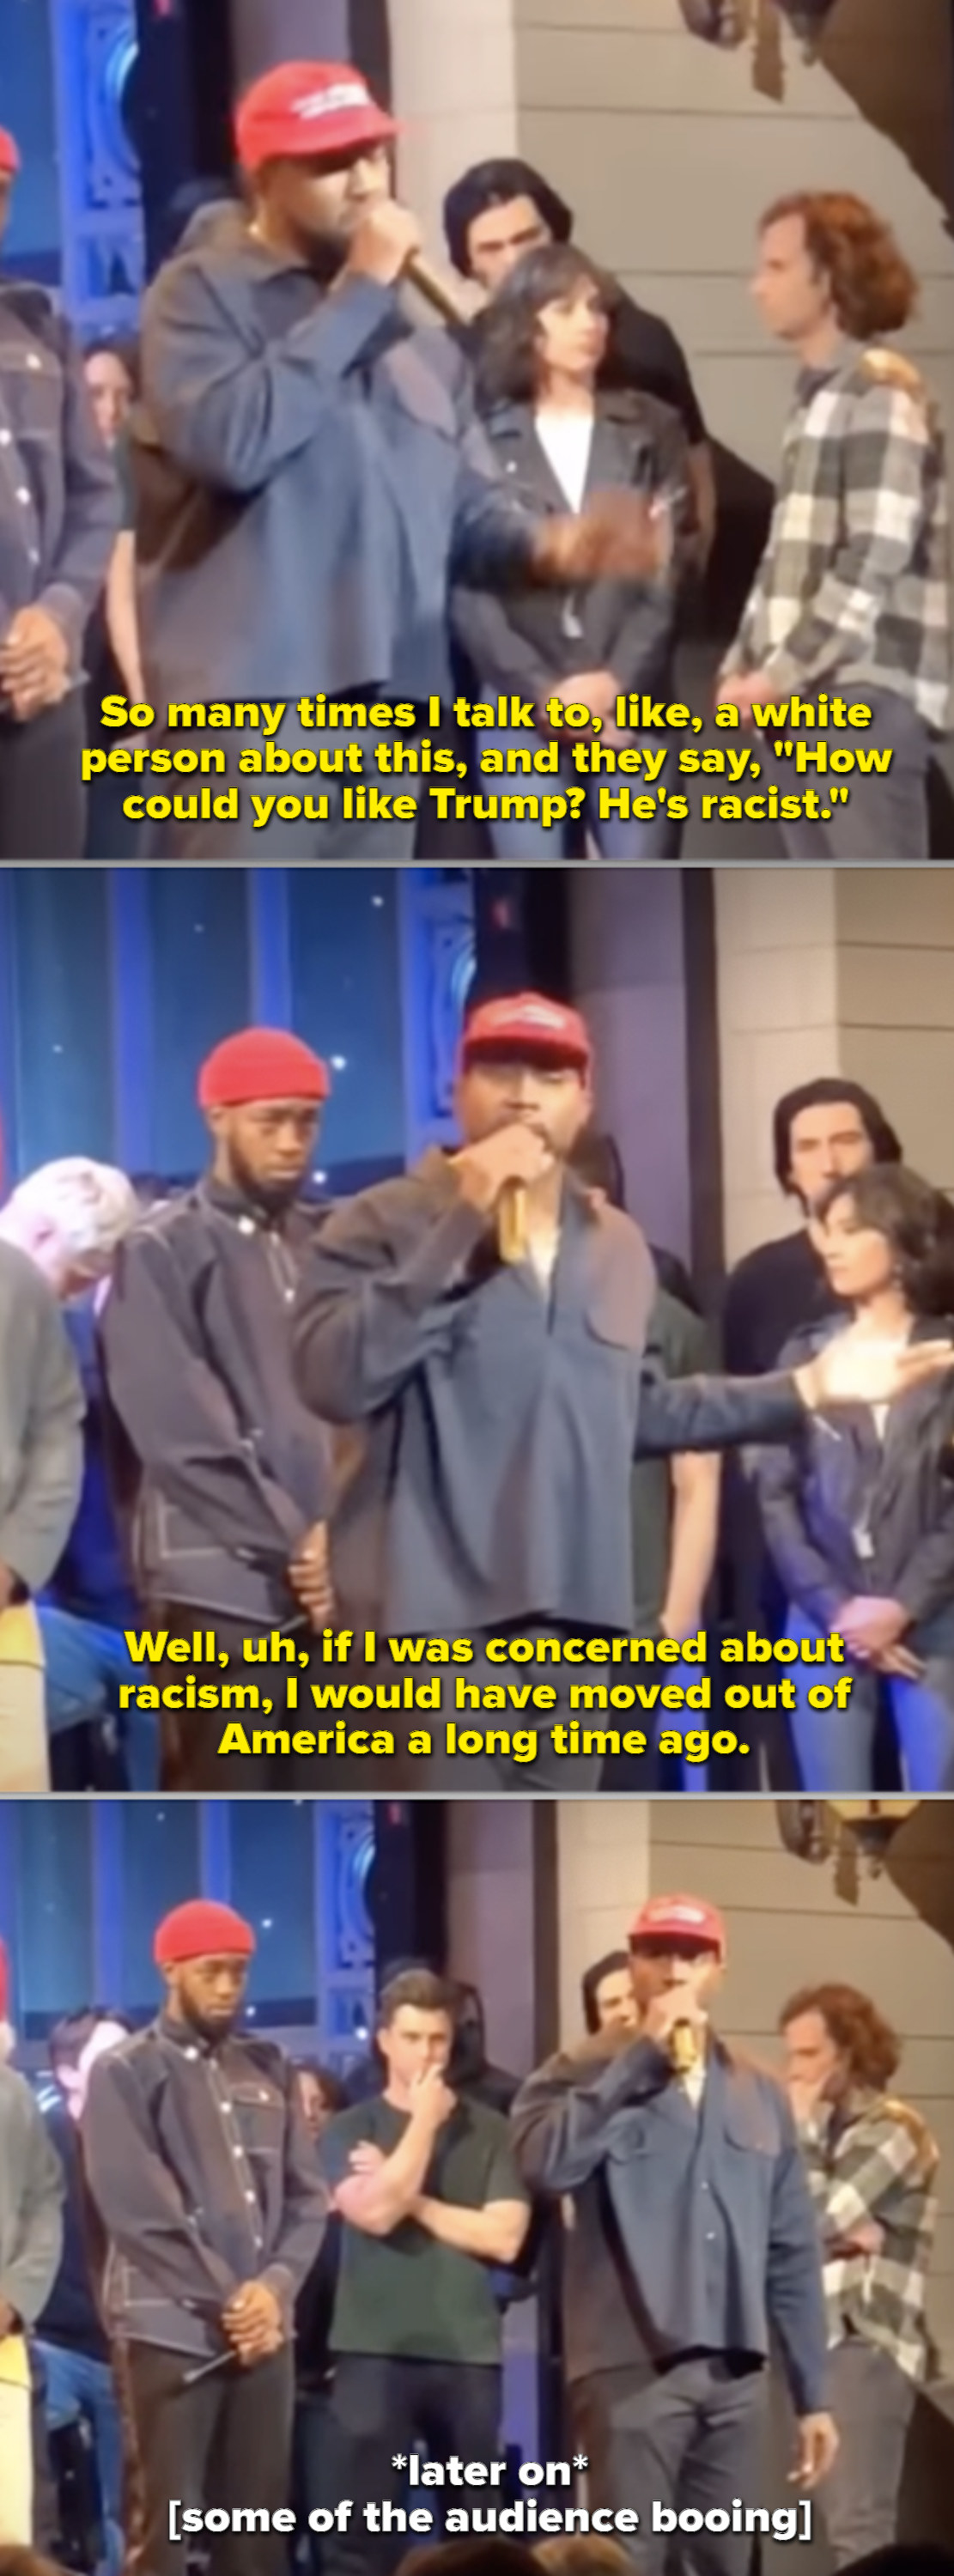 Kanye West on stage at &quot;SNL&quot; while some of the cast awkwardly stands behind him